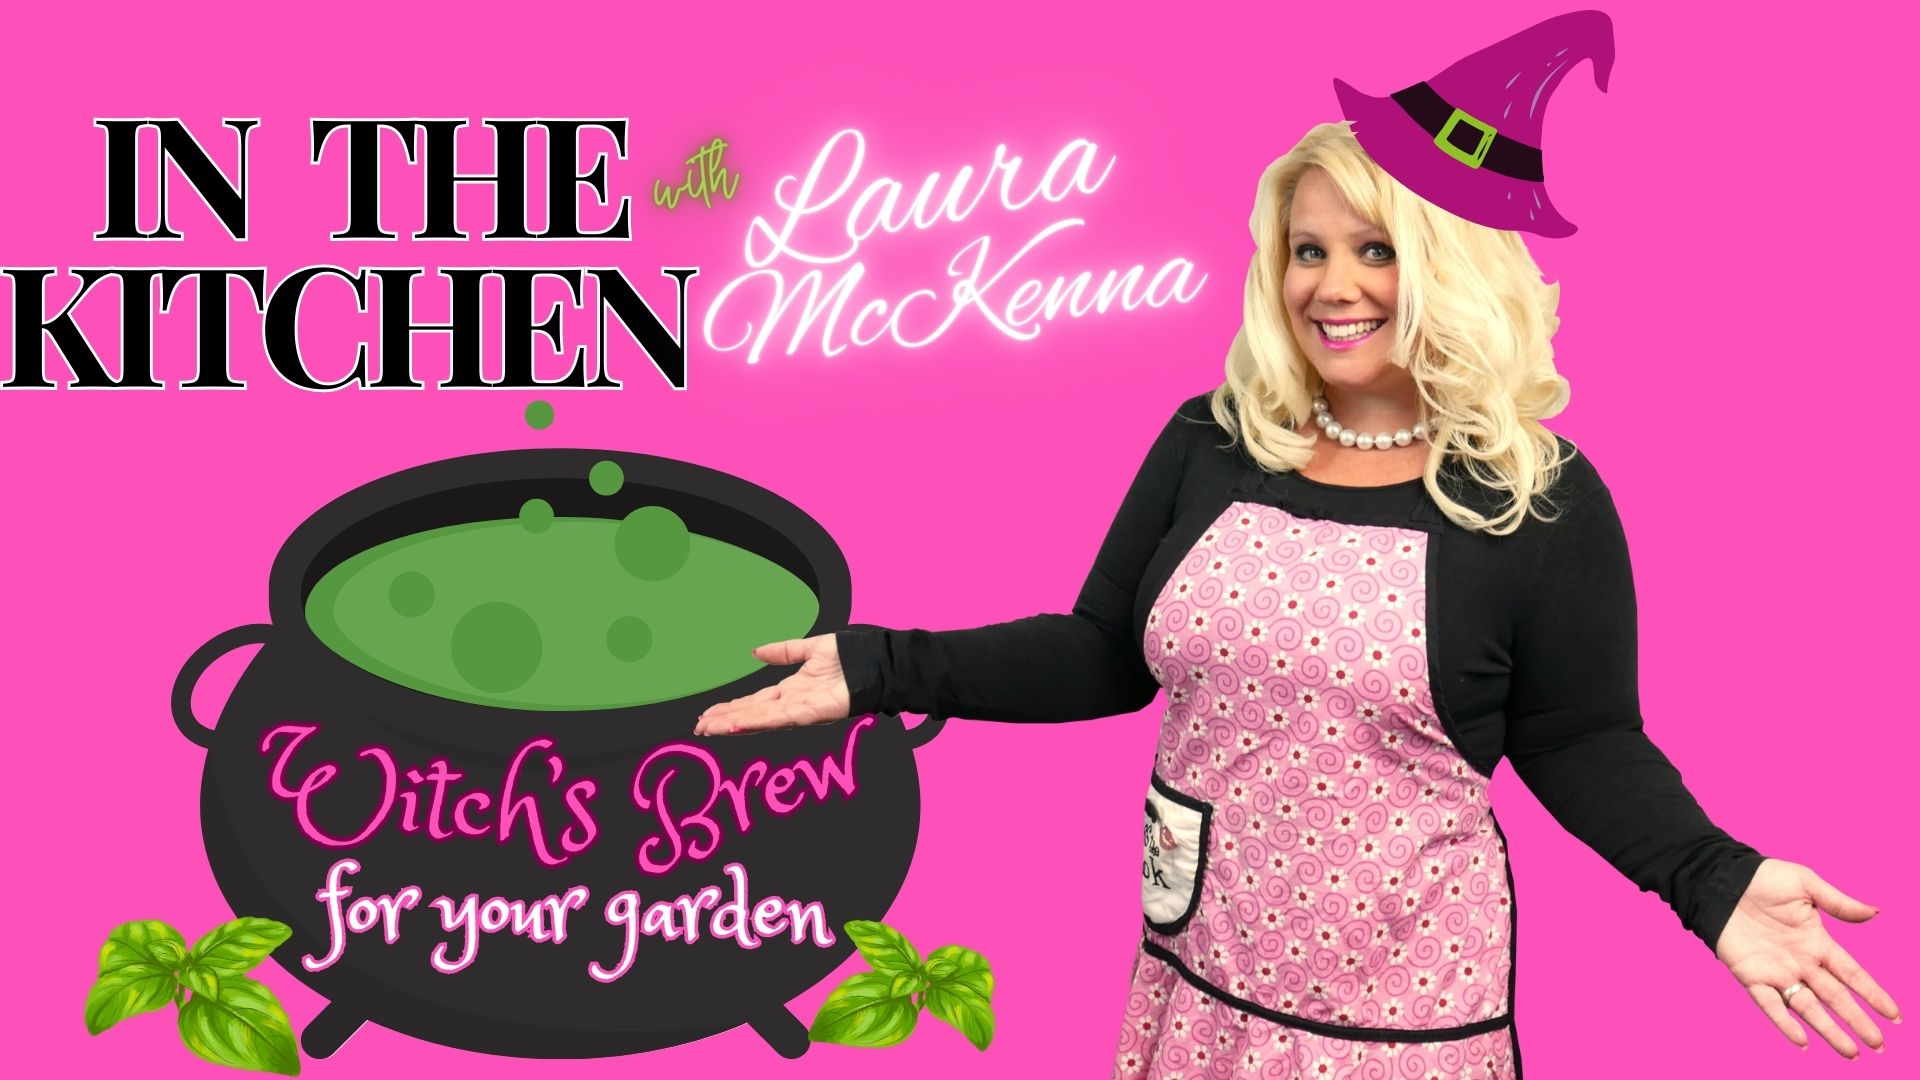 In The Kitchen with Laura McKenna:   Witch’s Brew For Your Garden